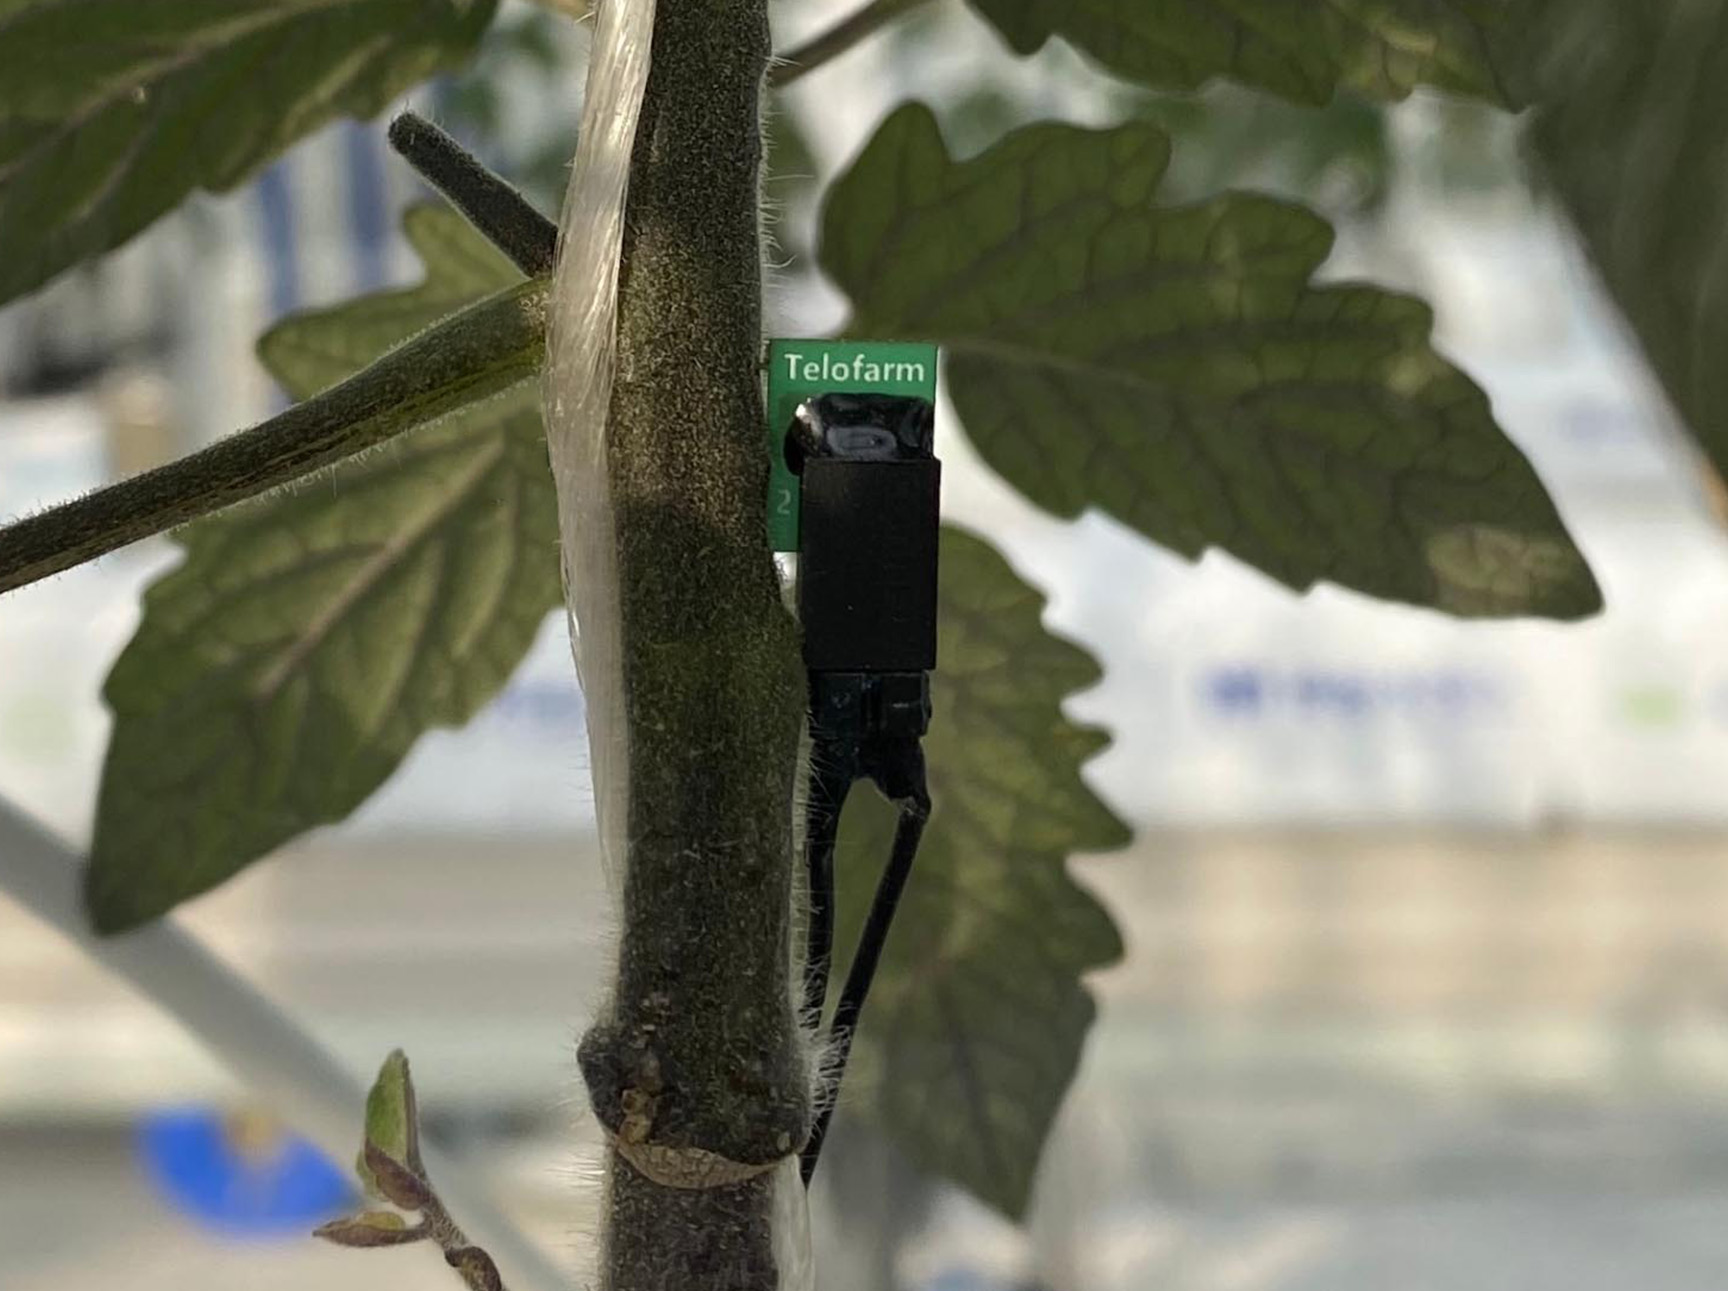 A sap flow probe installed in a tomato stem